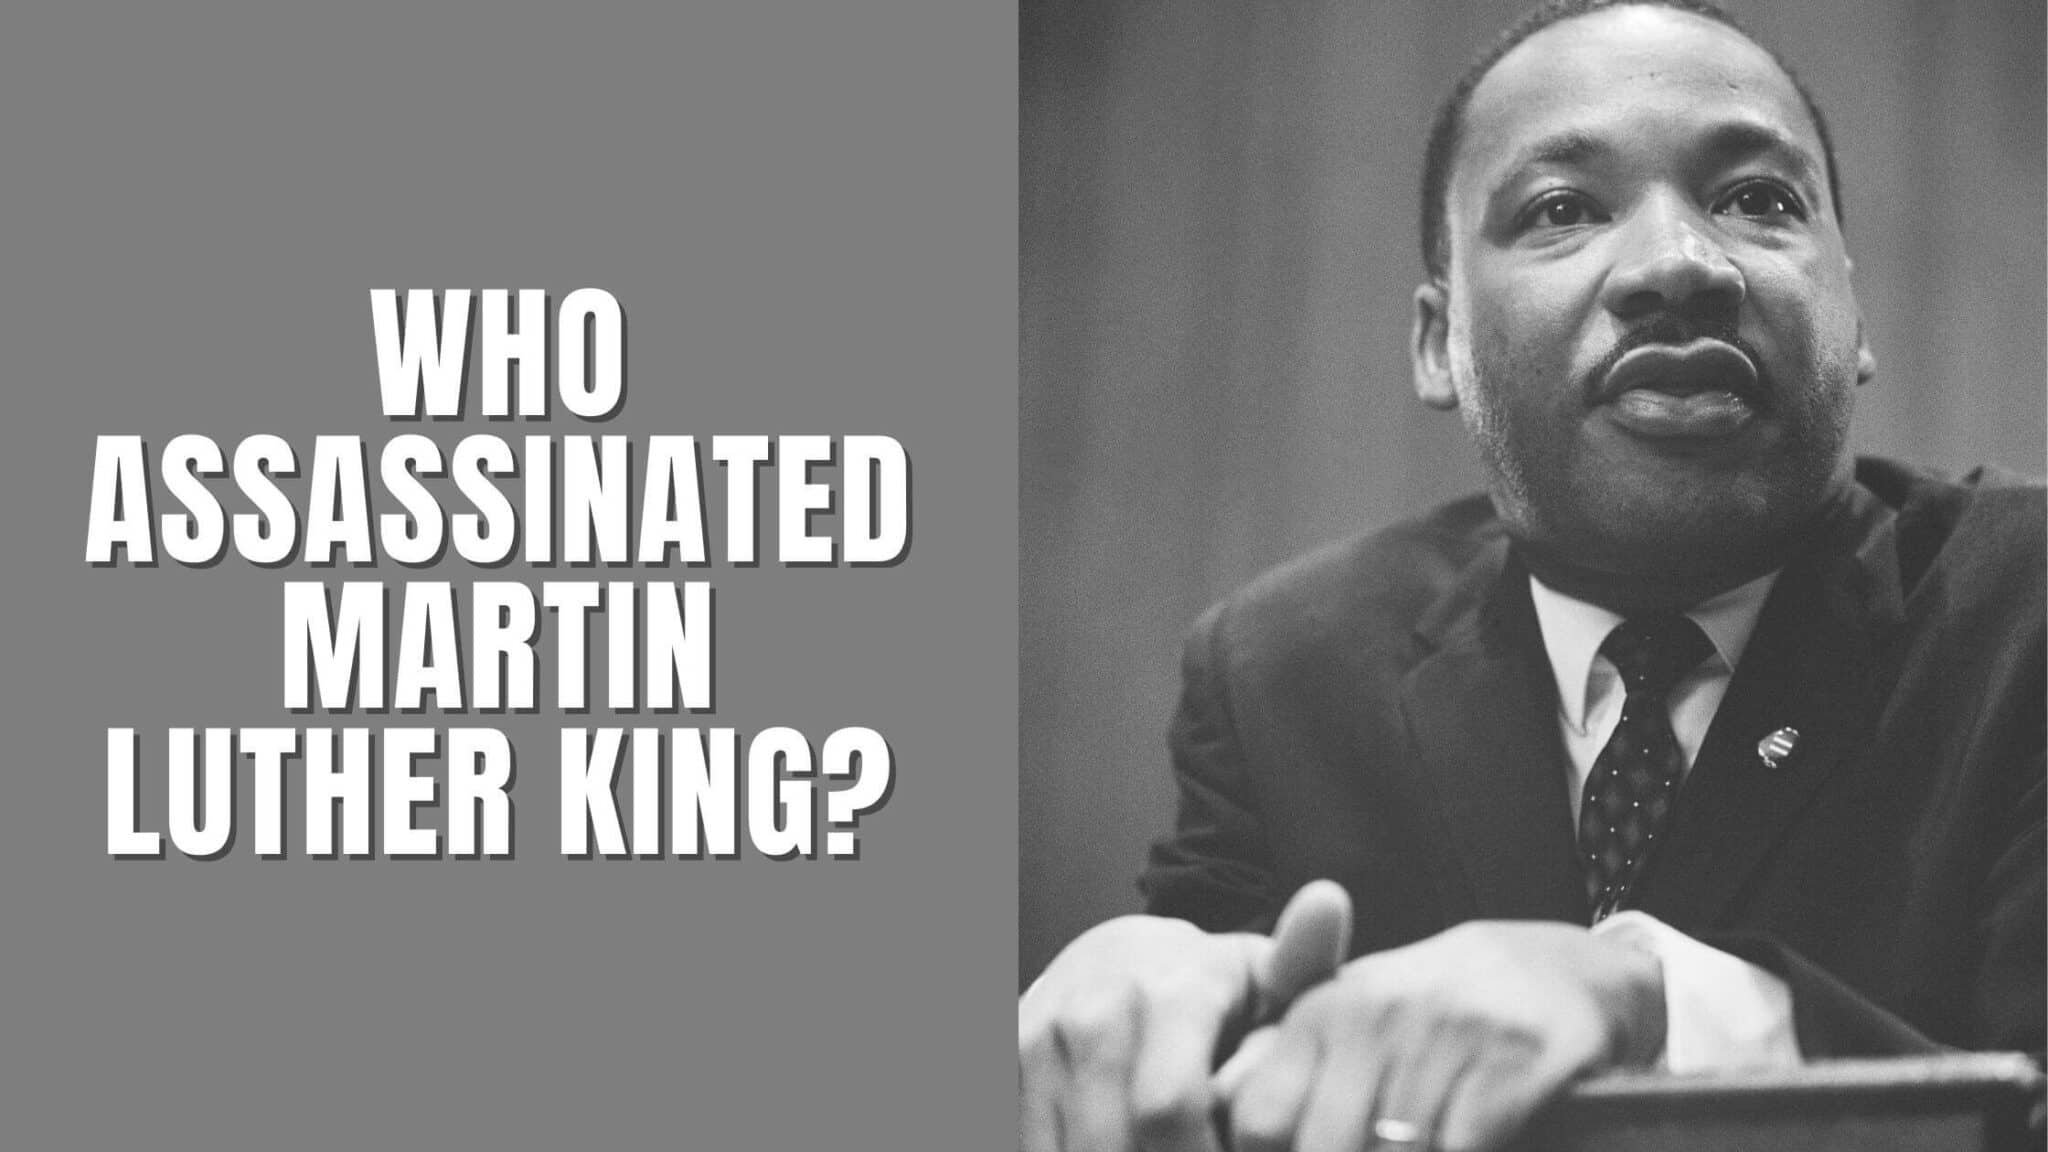 Who Assassinated Martin Luther King? Death of a Civil Rights Icon